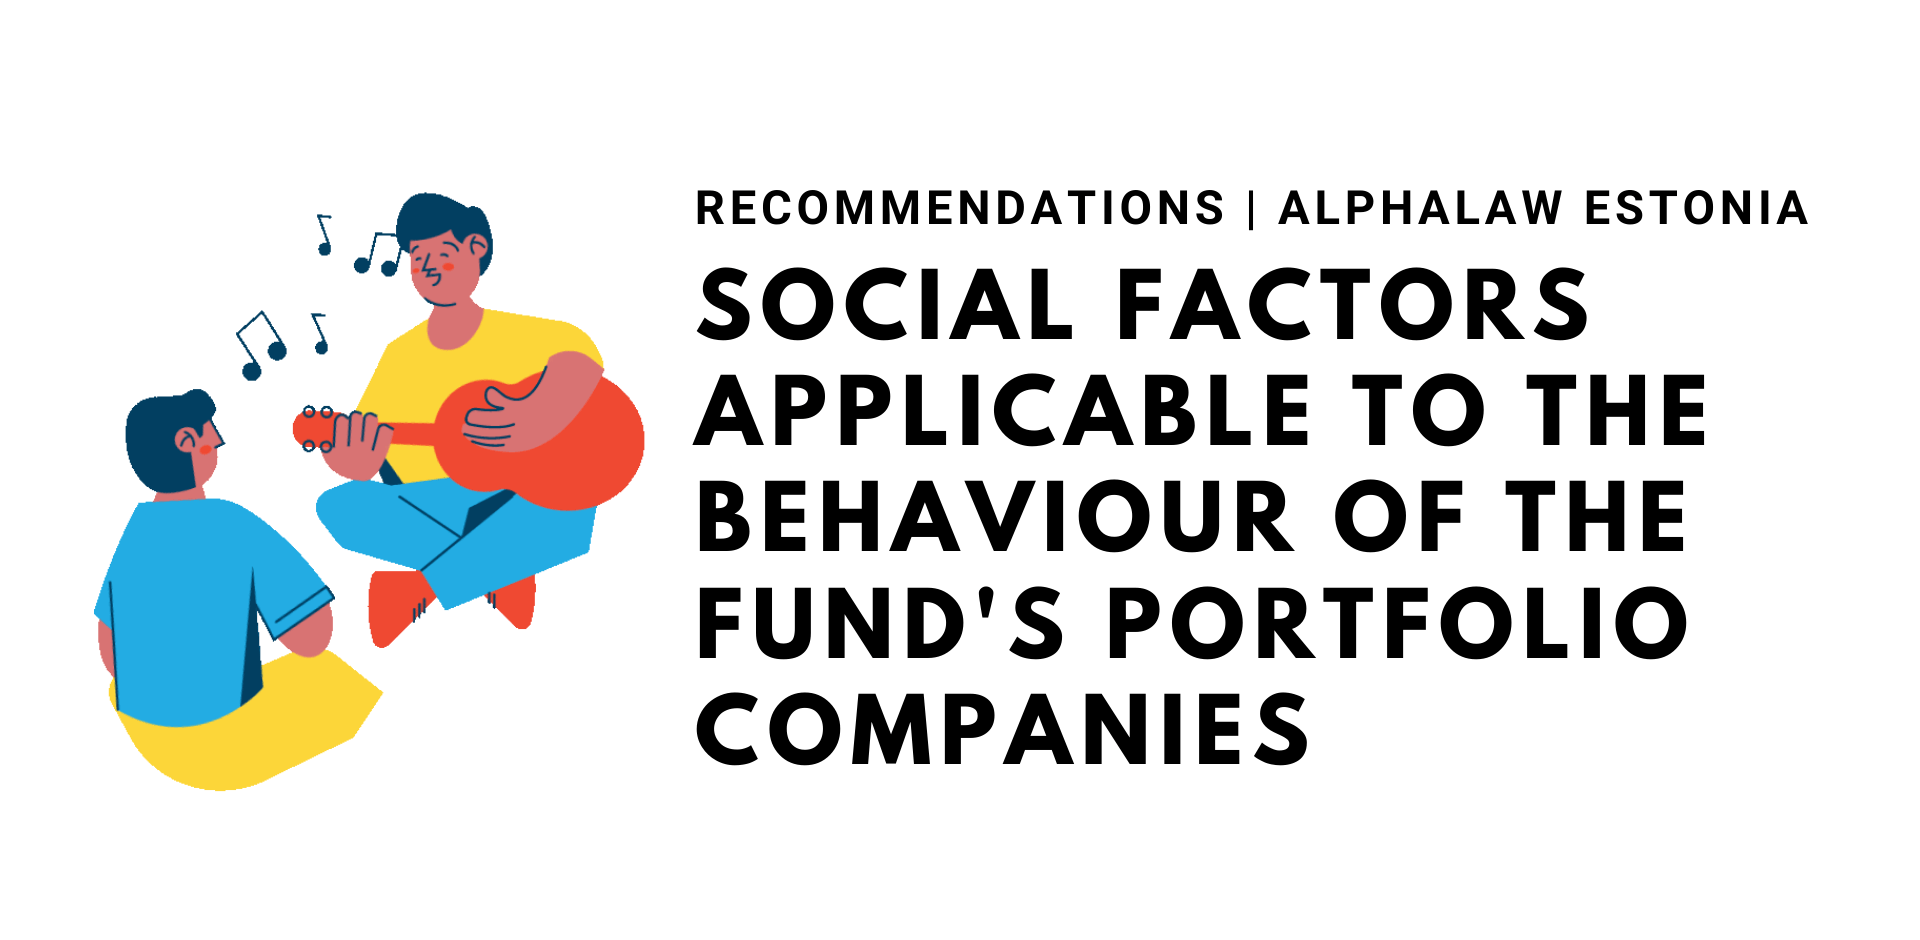 Social Factors Applicable to the Behaviour of the Fund's Portfolio Companies